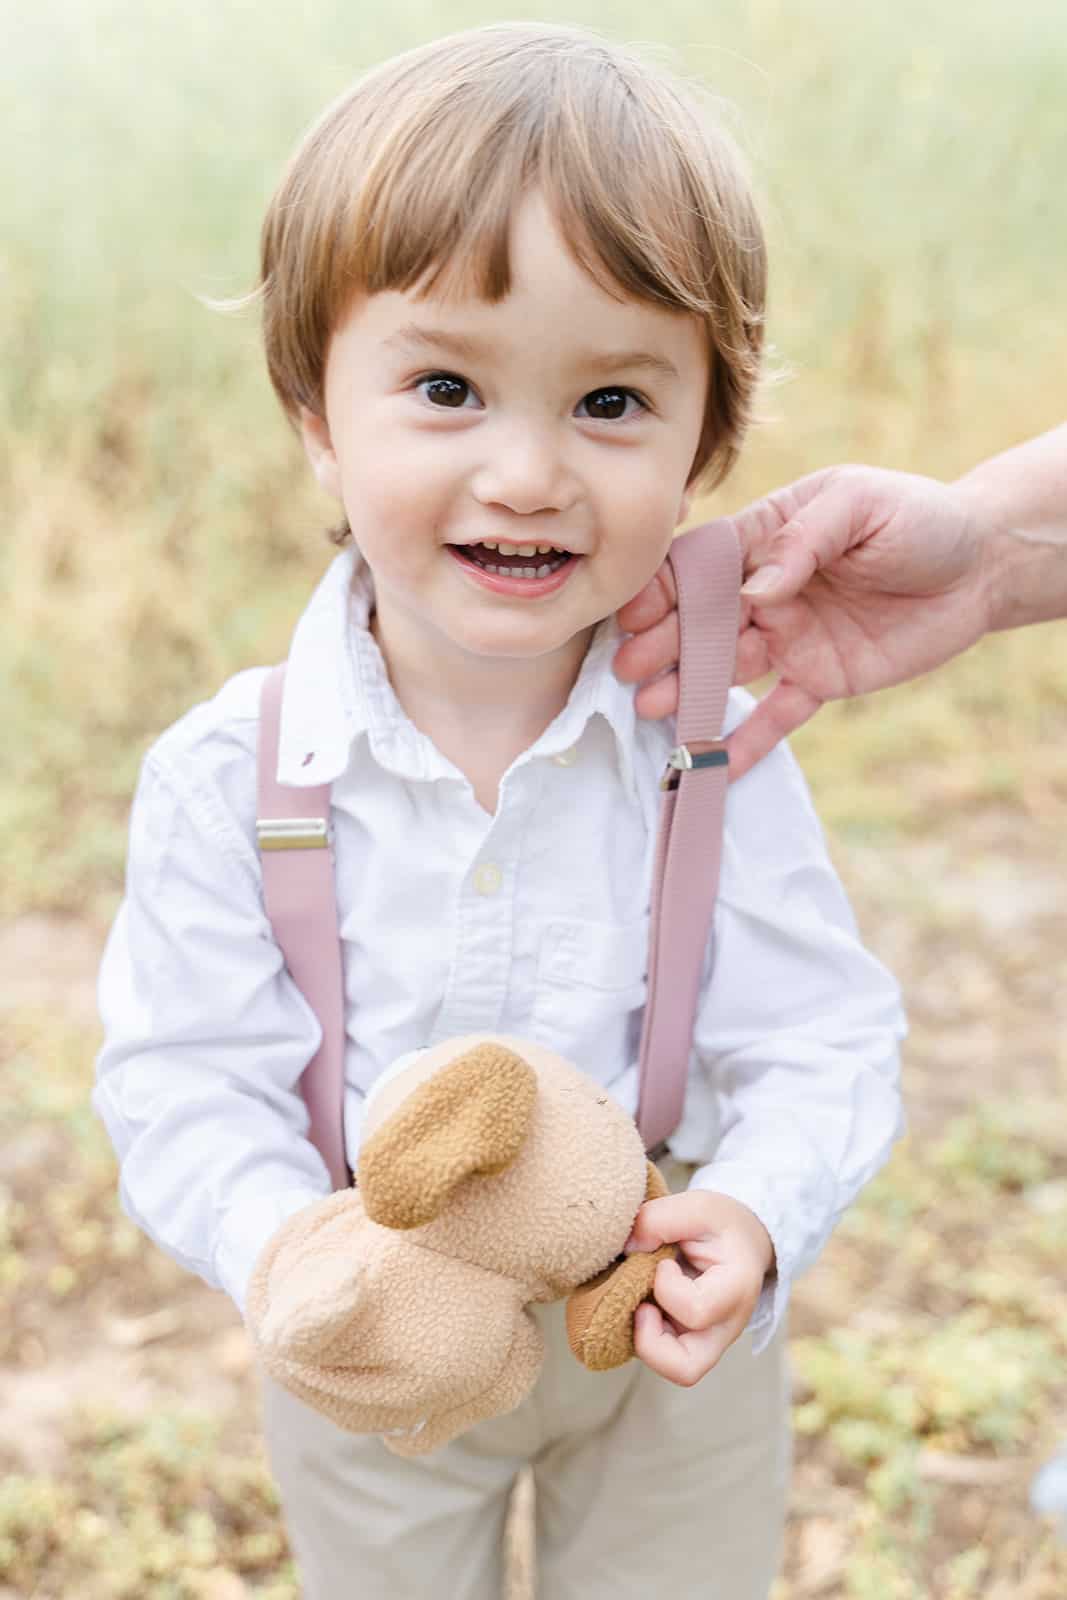 A young boy in pink suspenders plays with a stuffed dog in a field of tall grass